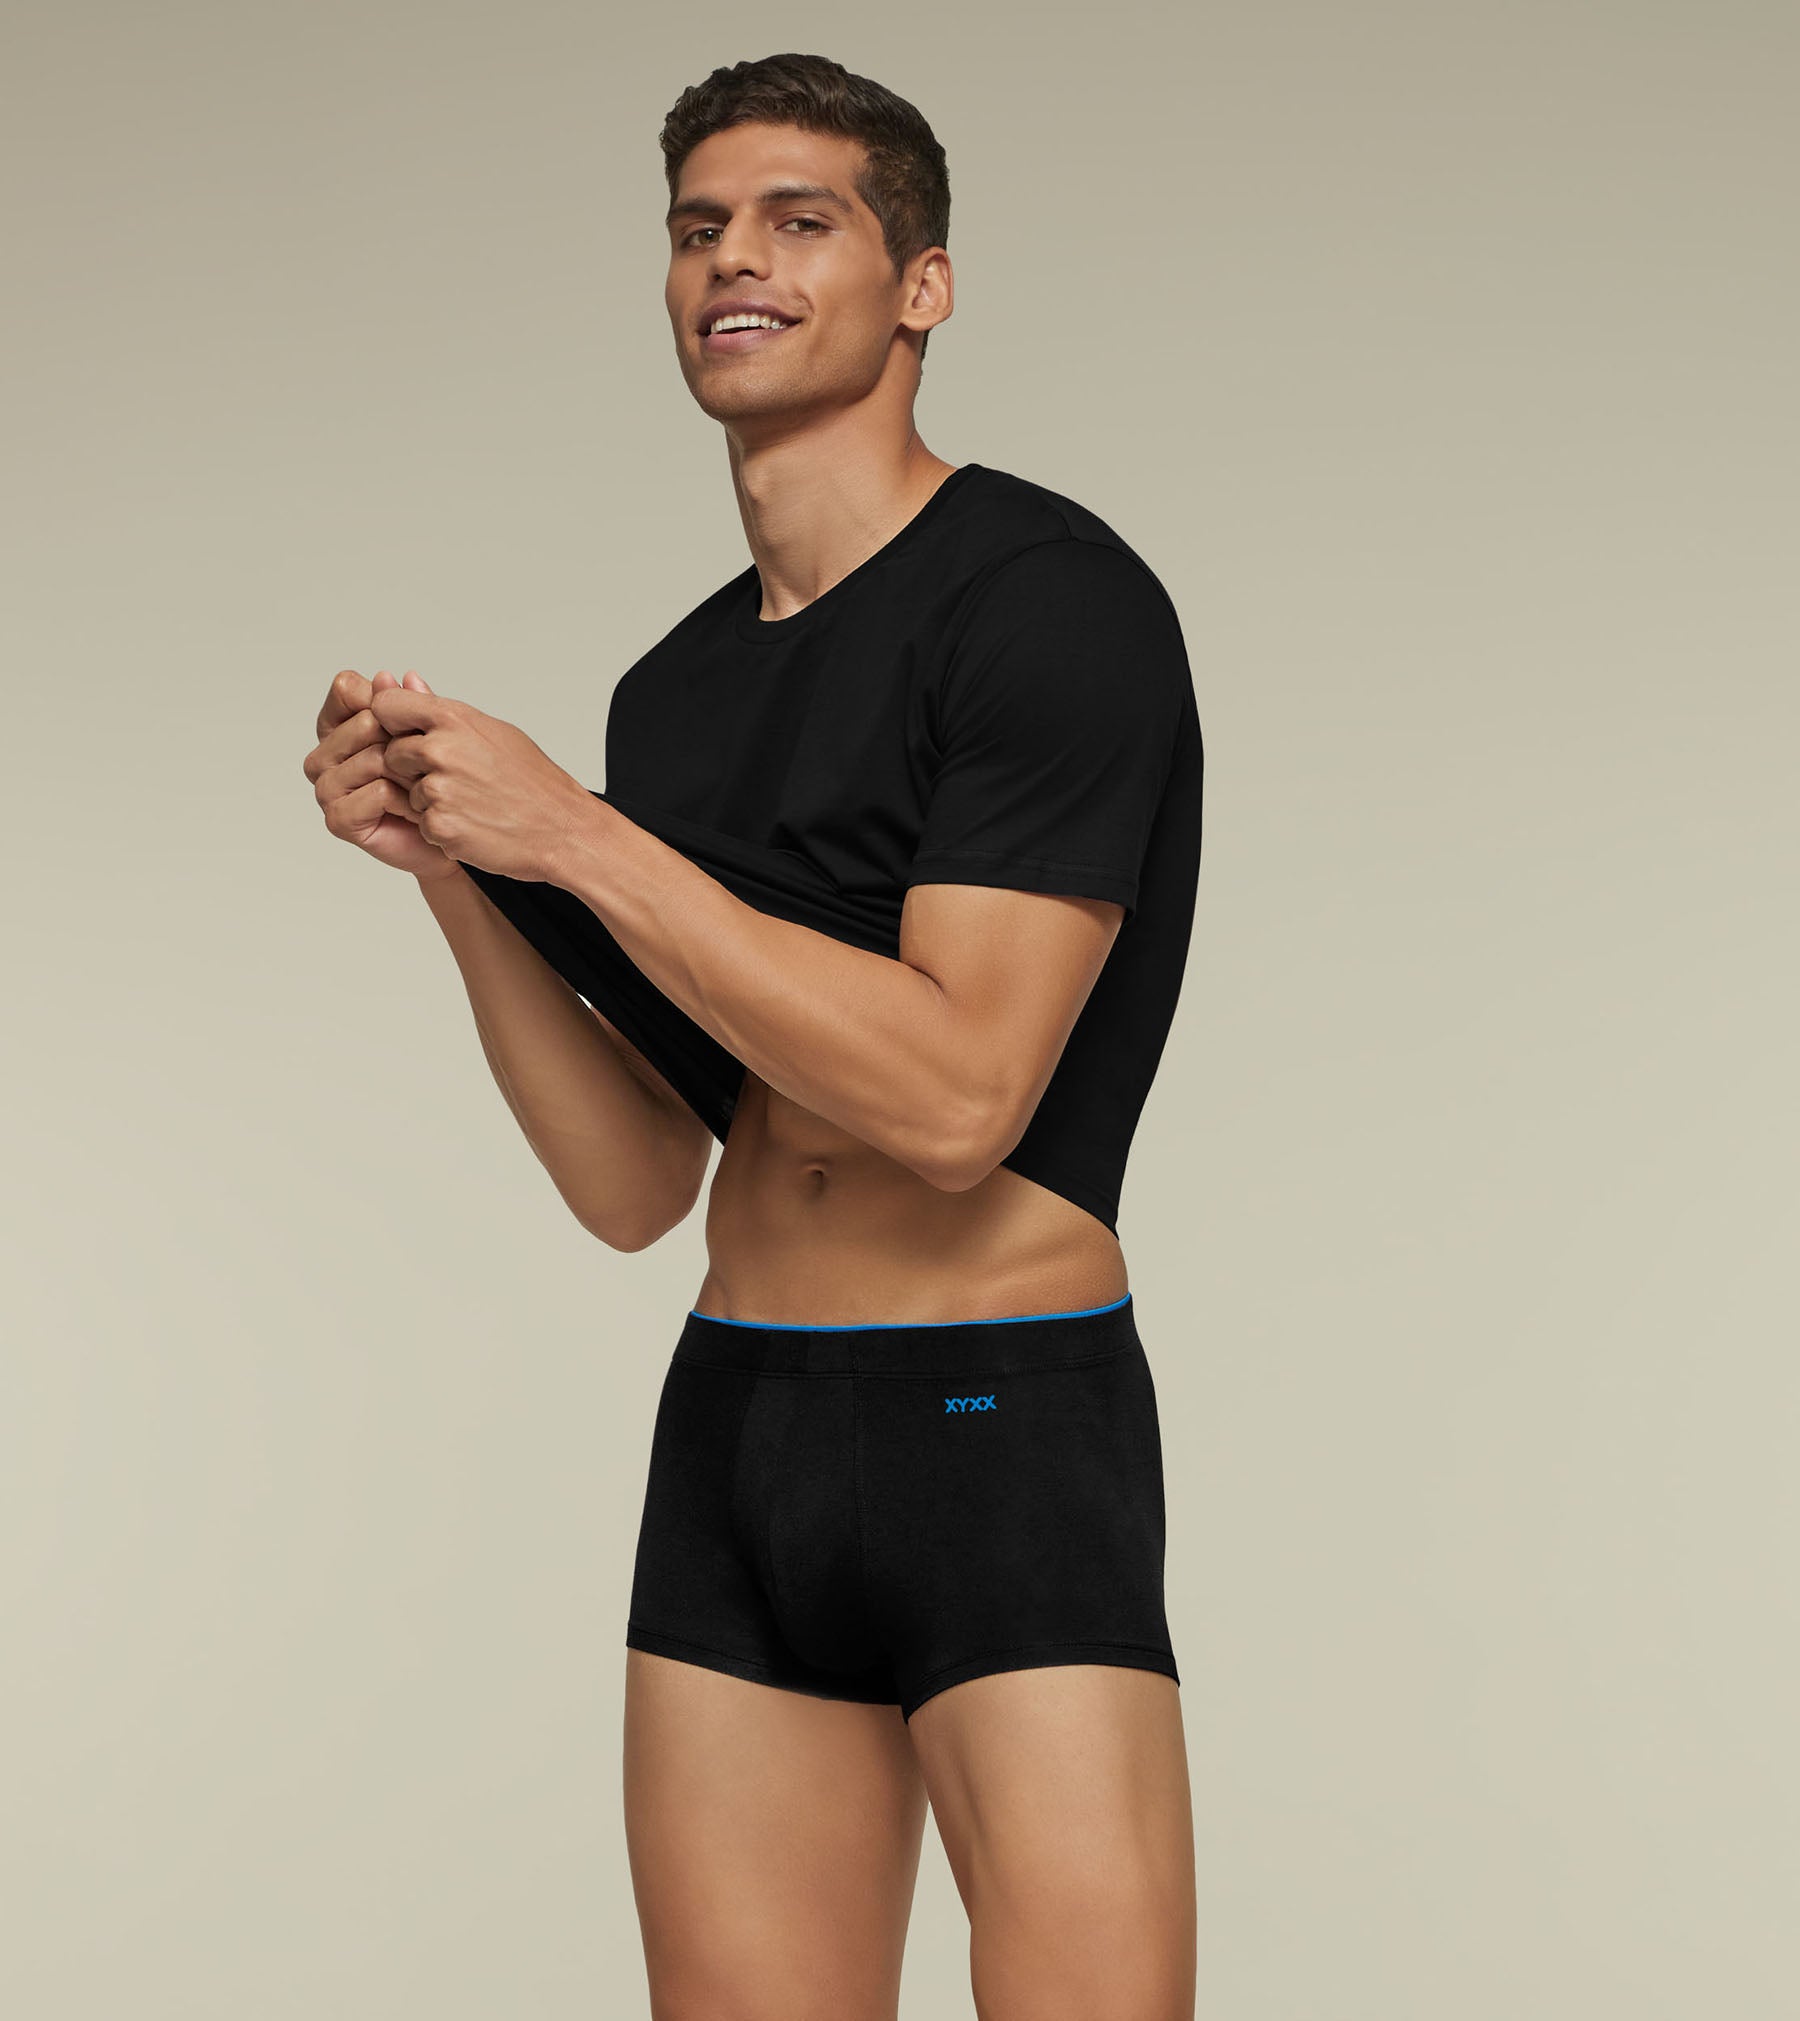 Uno Modal Trunks For Men Pack of 3 (All Black) -  XYXX Mens Apparels